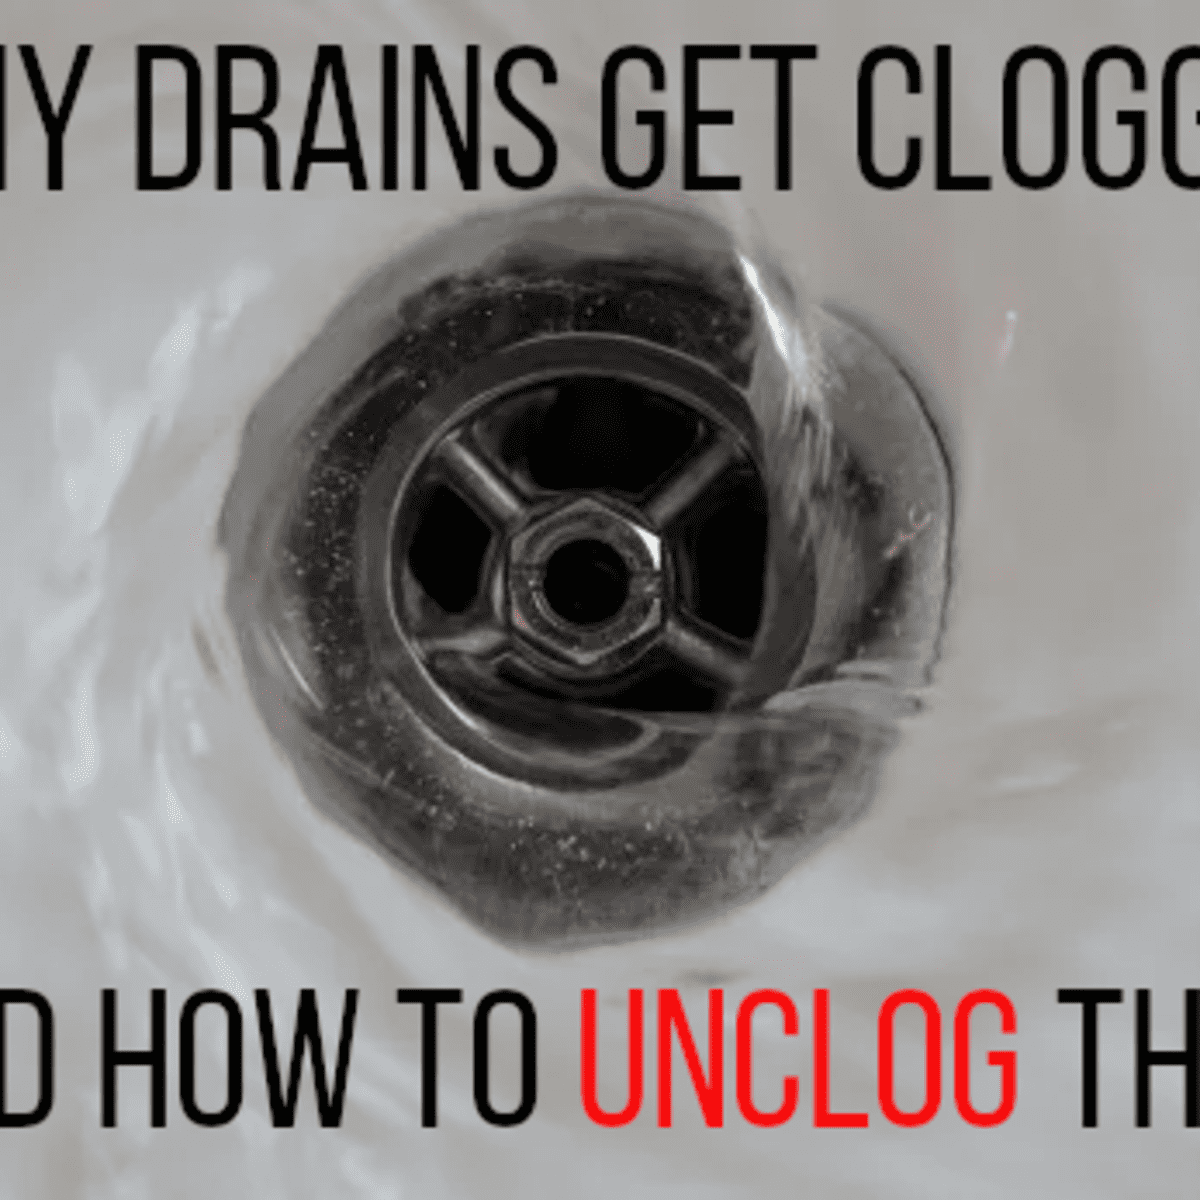 14 Common Causes Of Clogged Drains And, How To Prevent Hair From Clogging Bathtub Drain